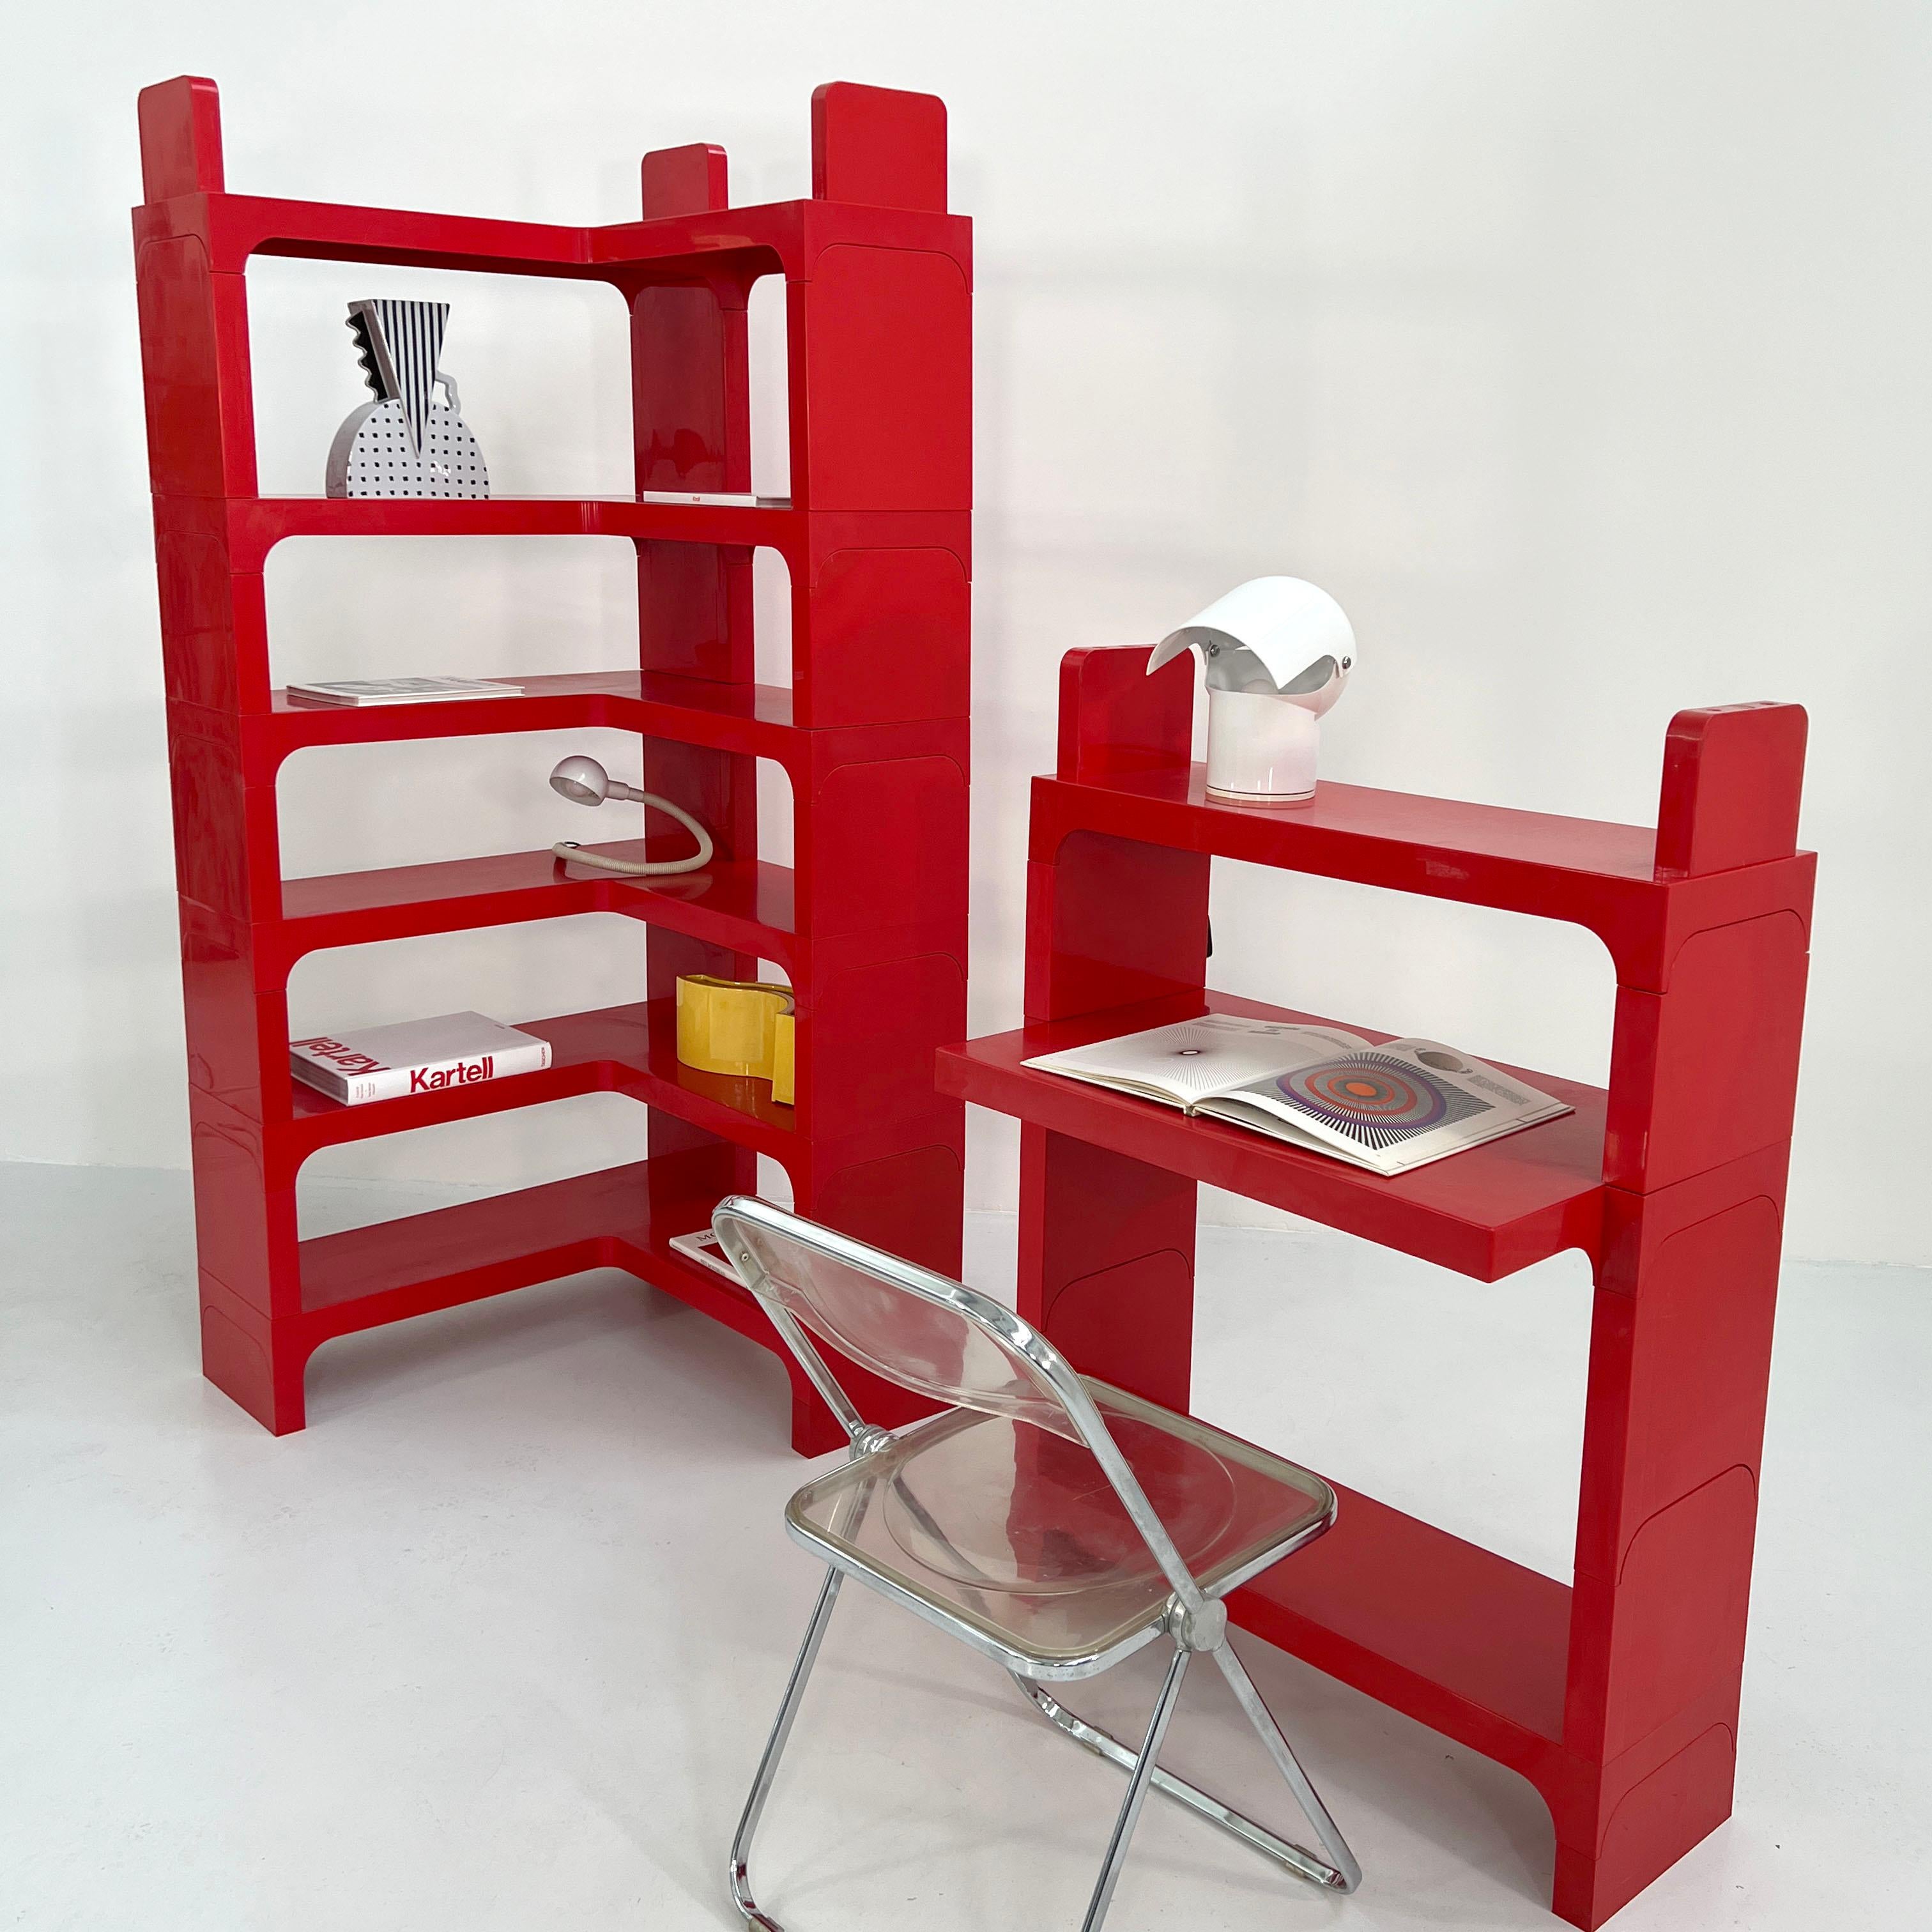 Plastic Red Modular Shelf with Desk by Olaf von Bohr for Kartell, 1970s